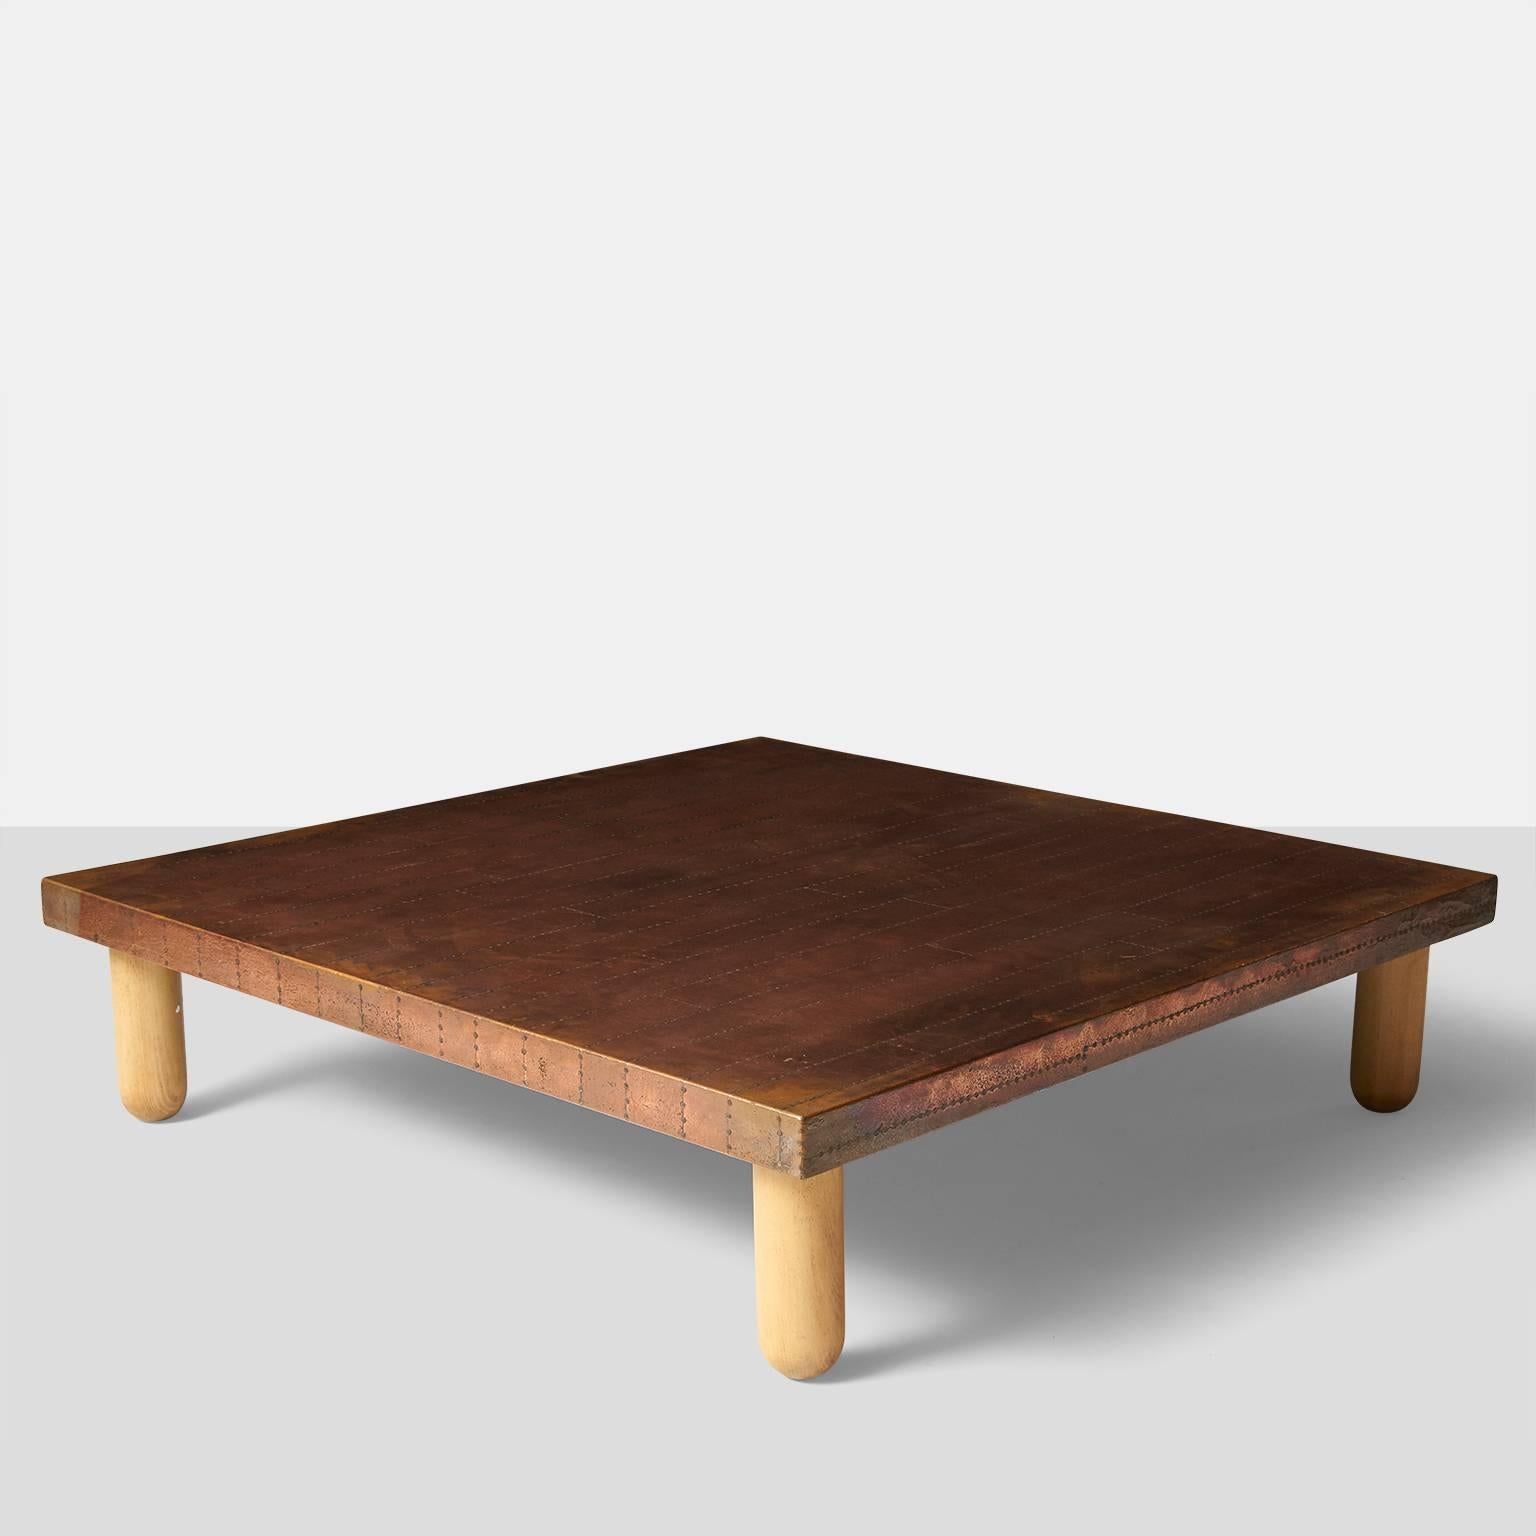 A large coffee table covered and with sheets of patinated copper attached with nail trim in a random plank pattern. Four beech wood legs and retaining the original signature 